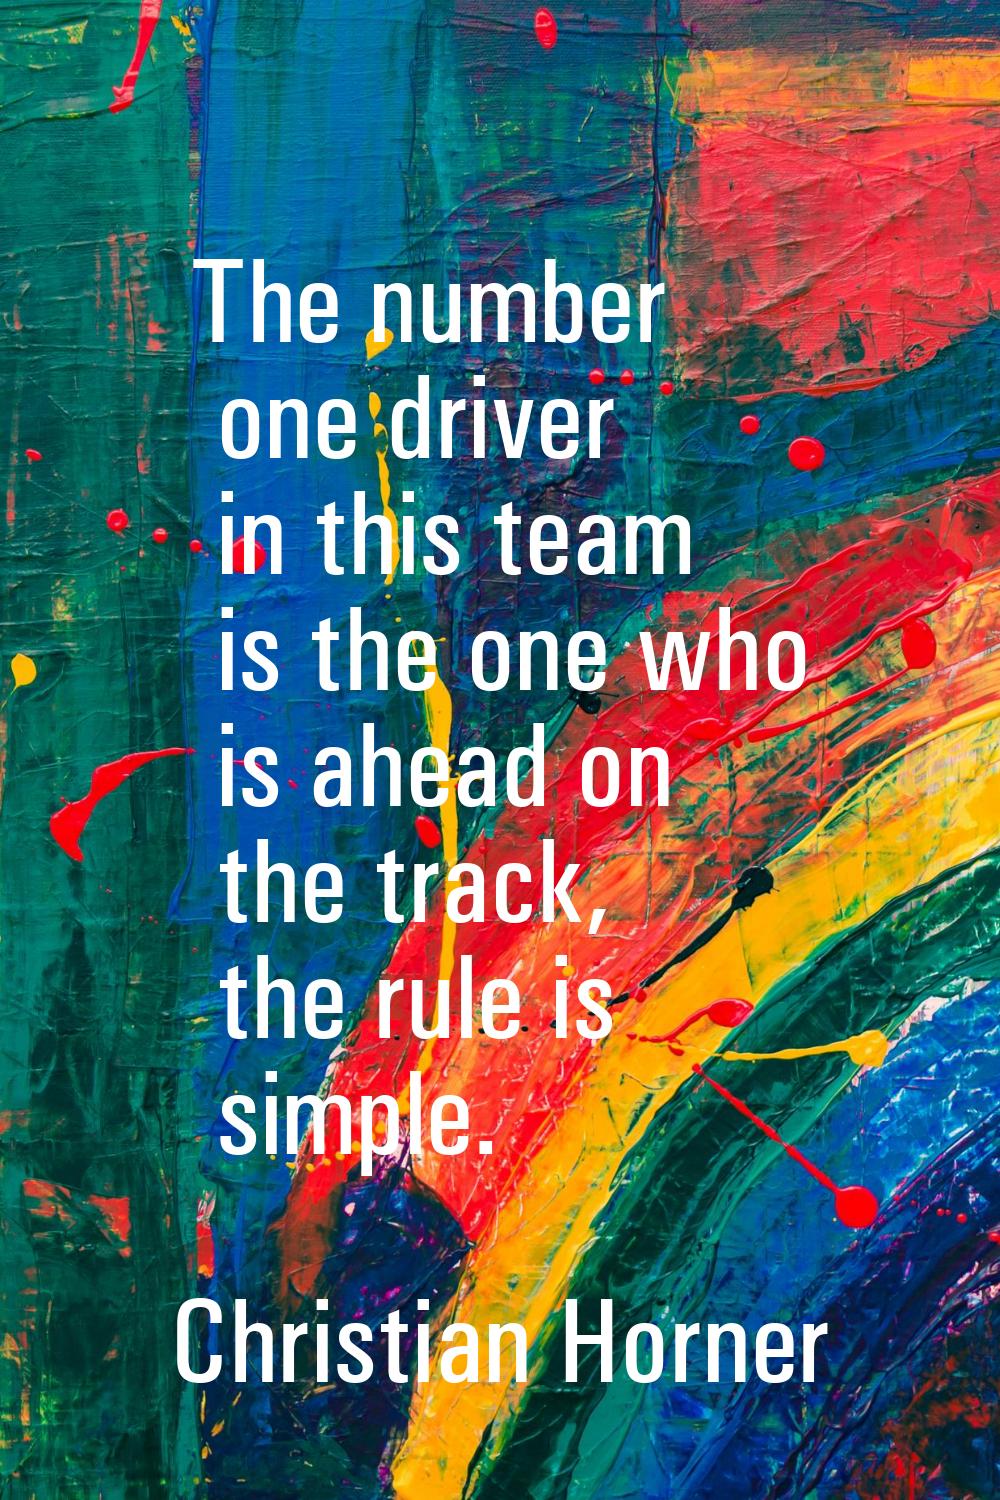 The number one driver in this team is the one who is ahead on the track, the rule is simple.